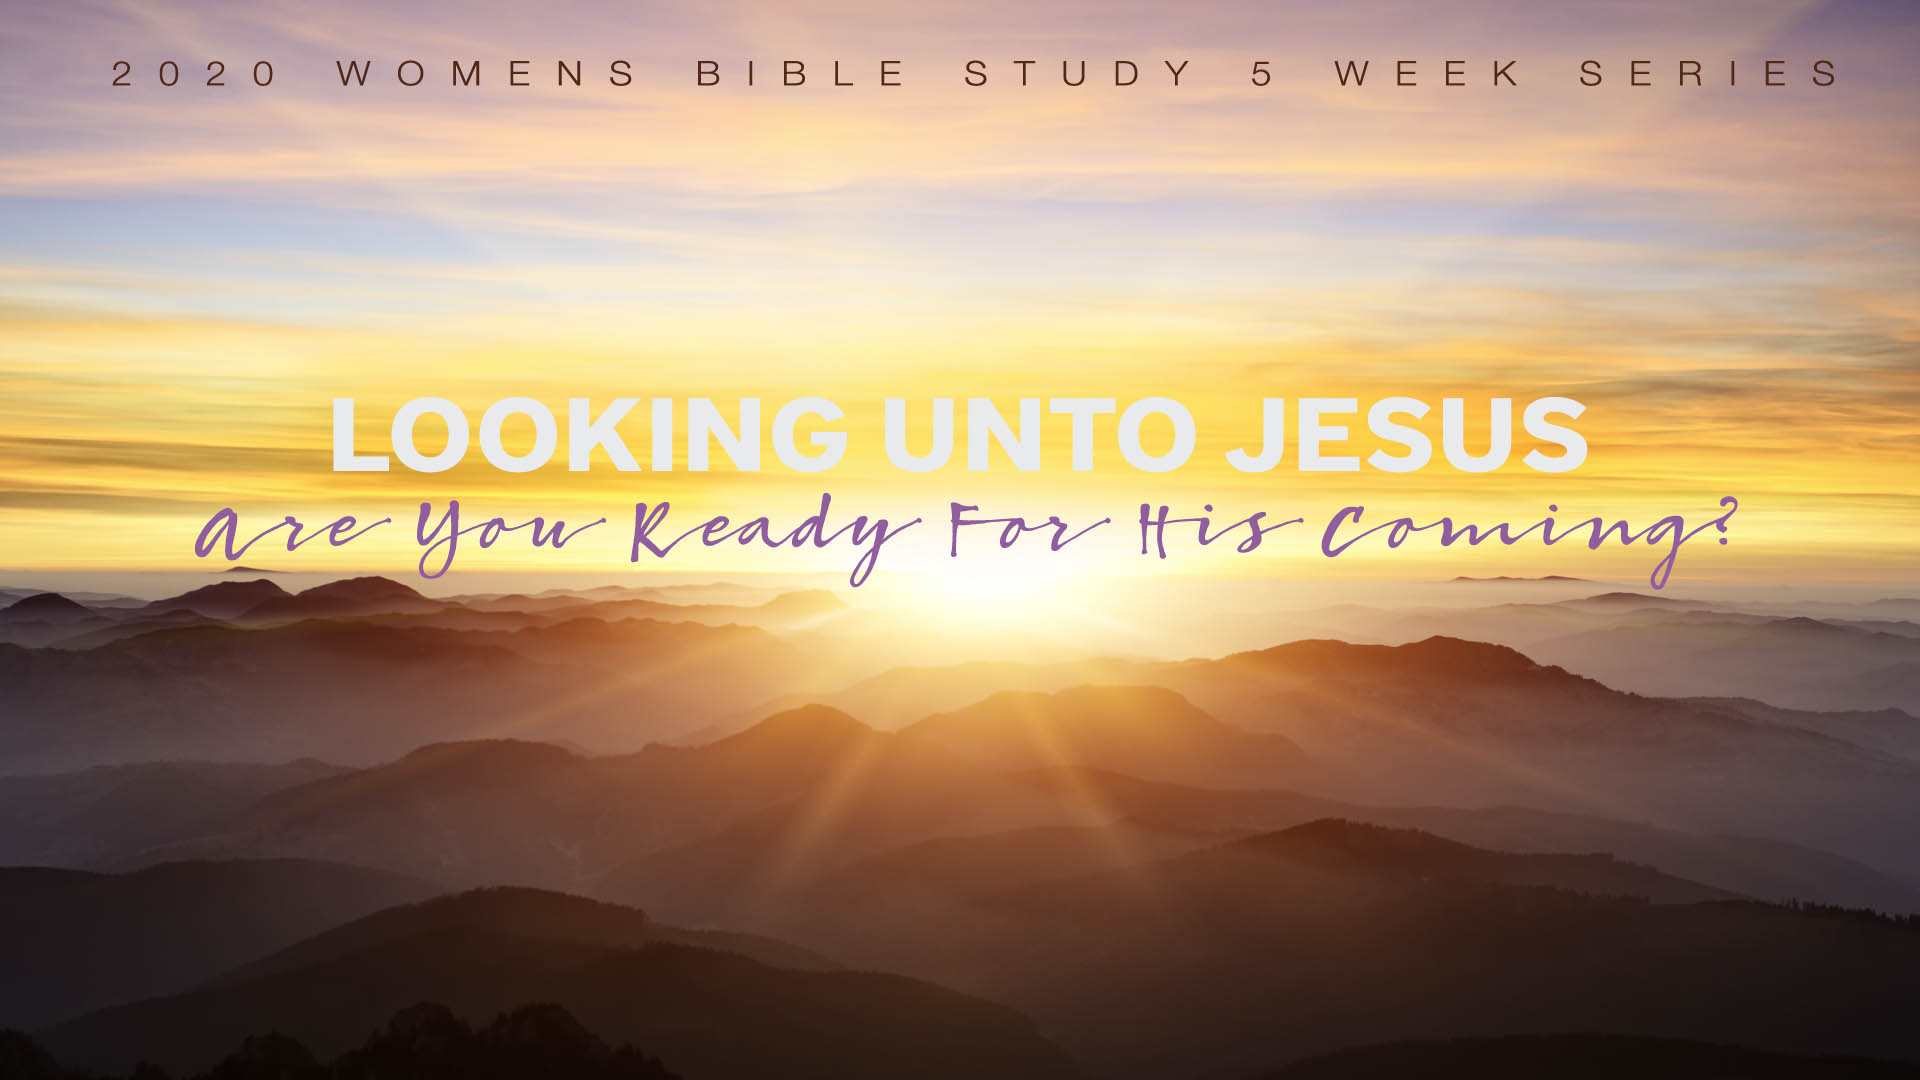 Women's Bible Study: Looking Unto Jesus! Are You Ready for His Coming?